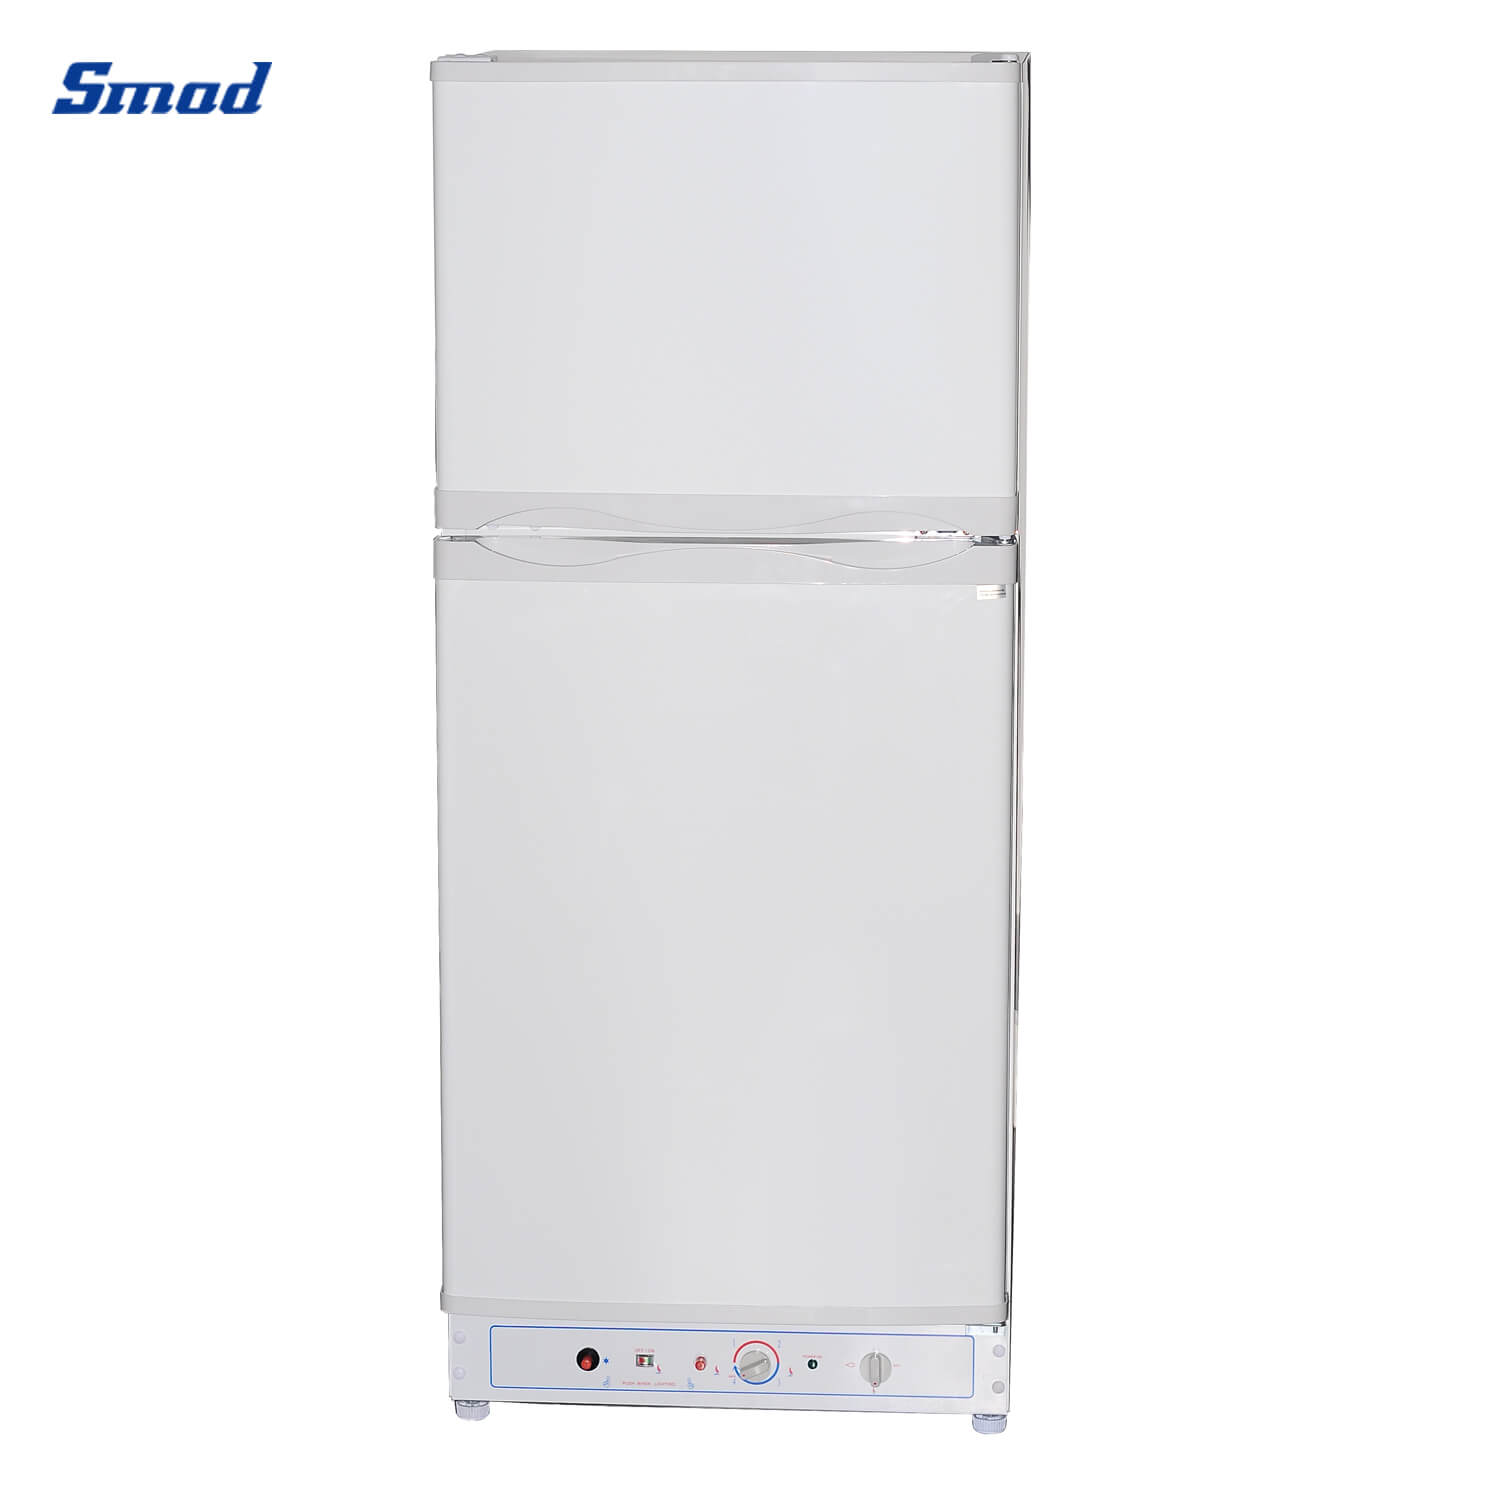 
Smad 275L Gas/Propane/Electric Top Freezer Absorption Refrigerator with durable system